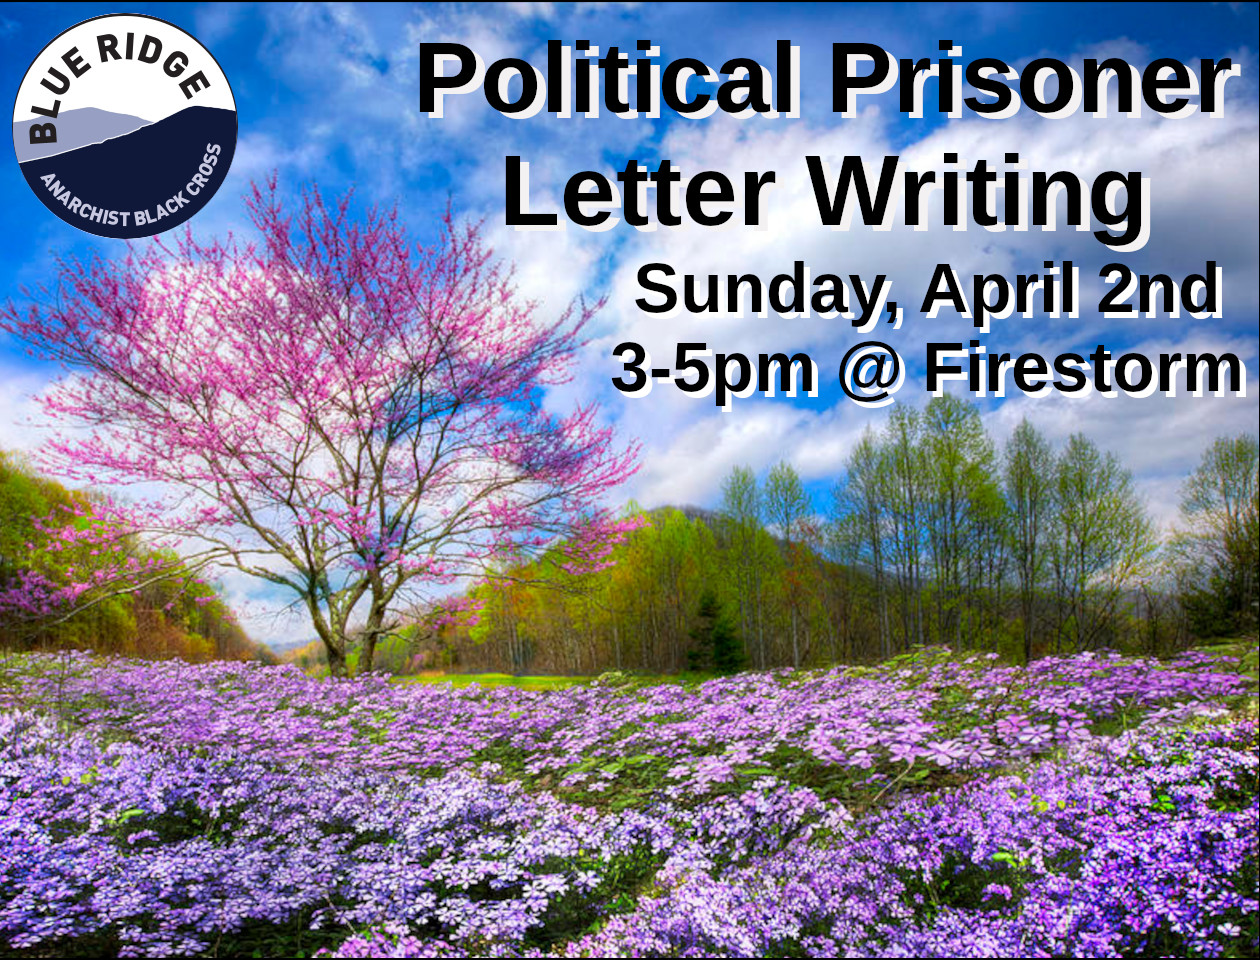 Political Prisoner Letter Writing event at Firestom books featuring a colorful field with purple and pink flowers